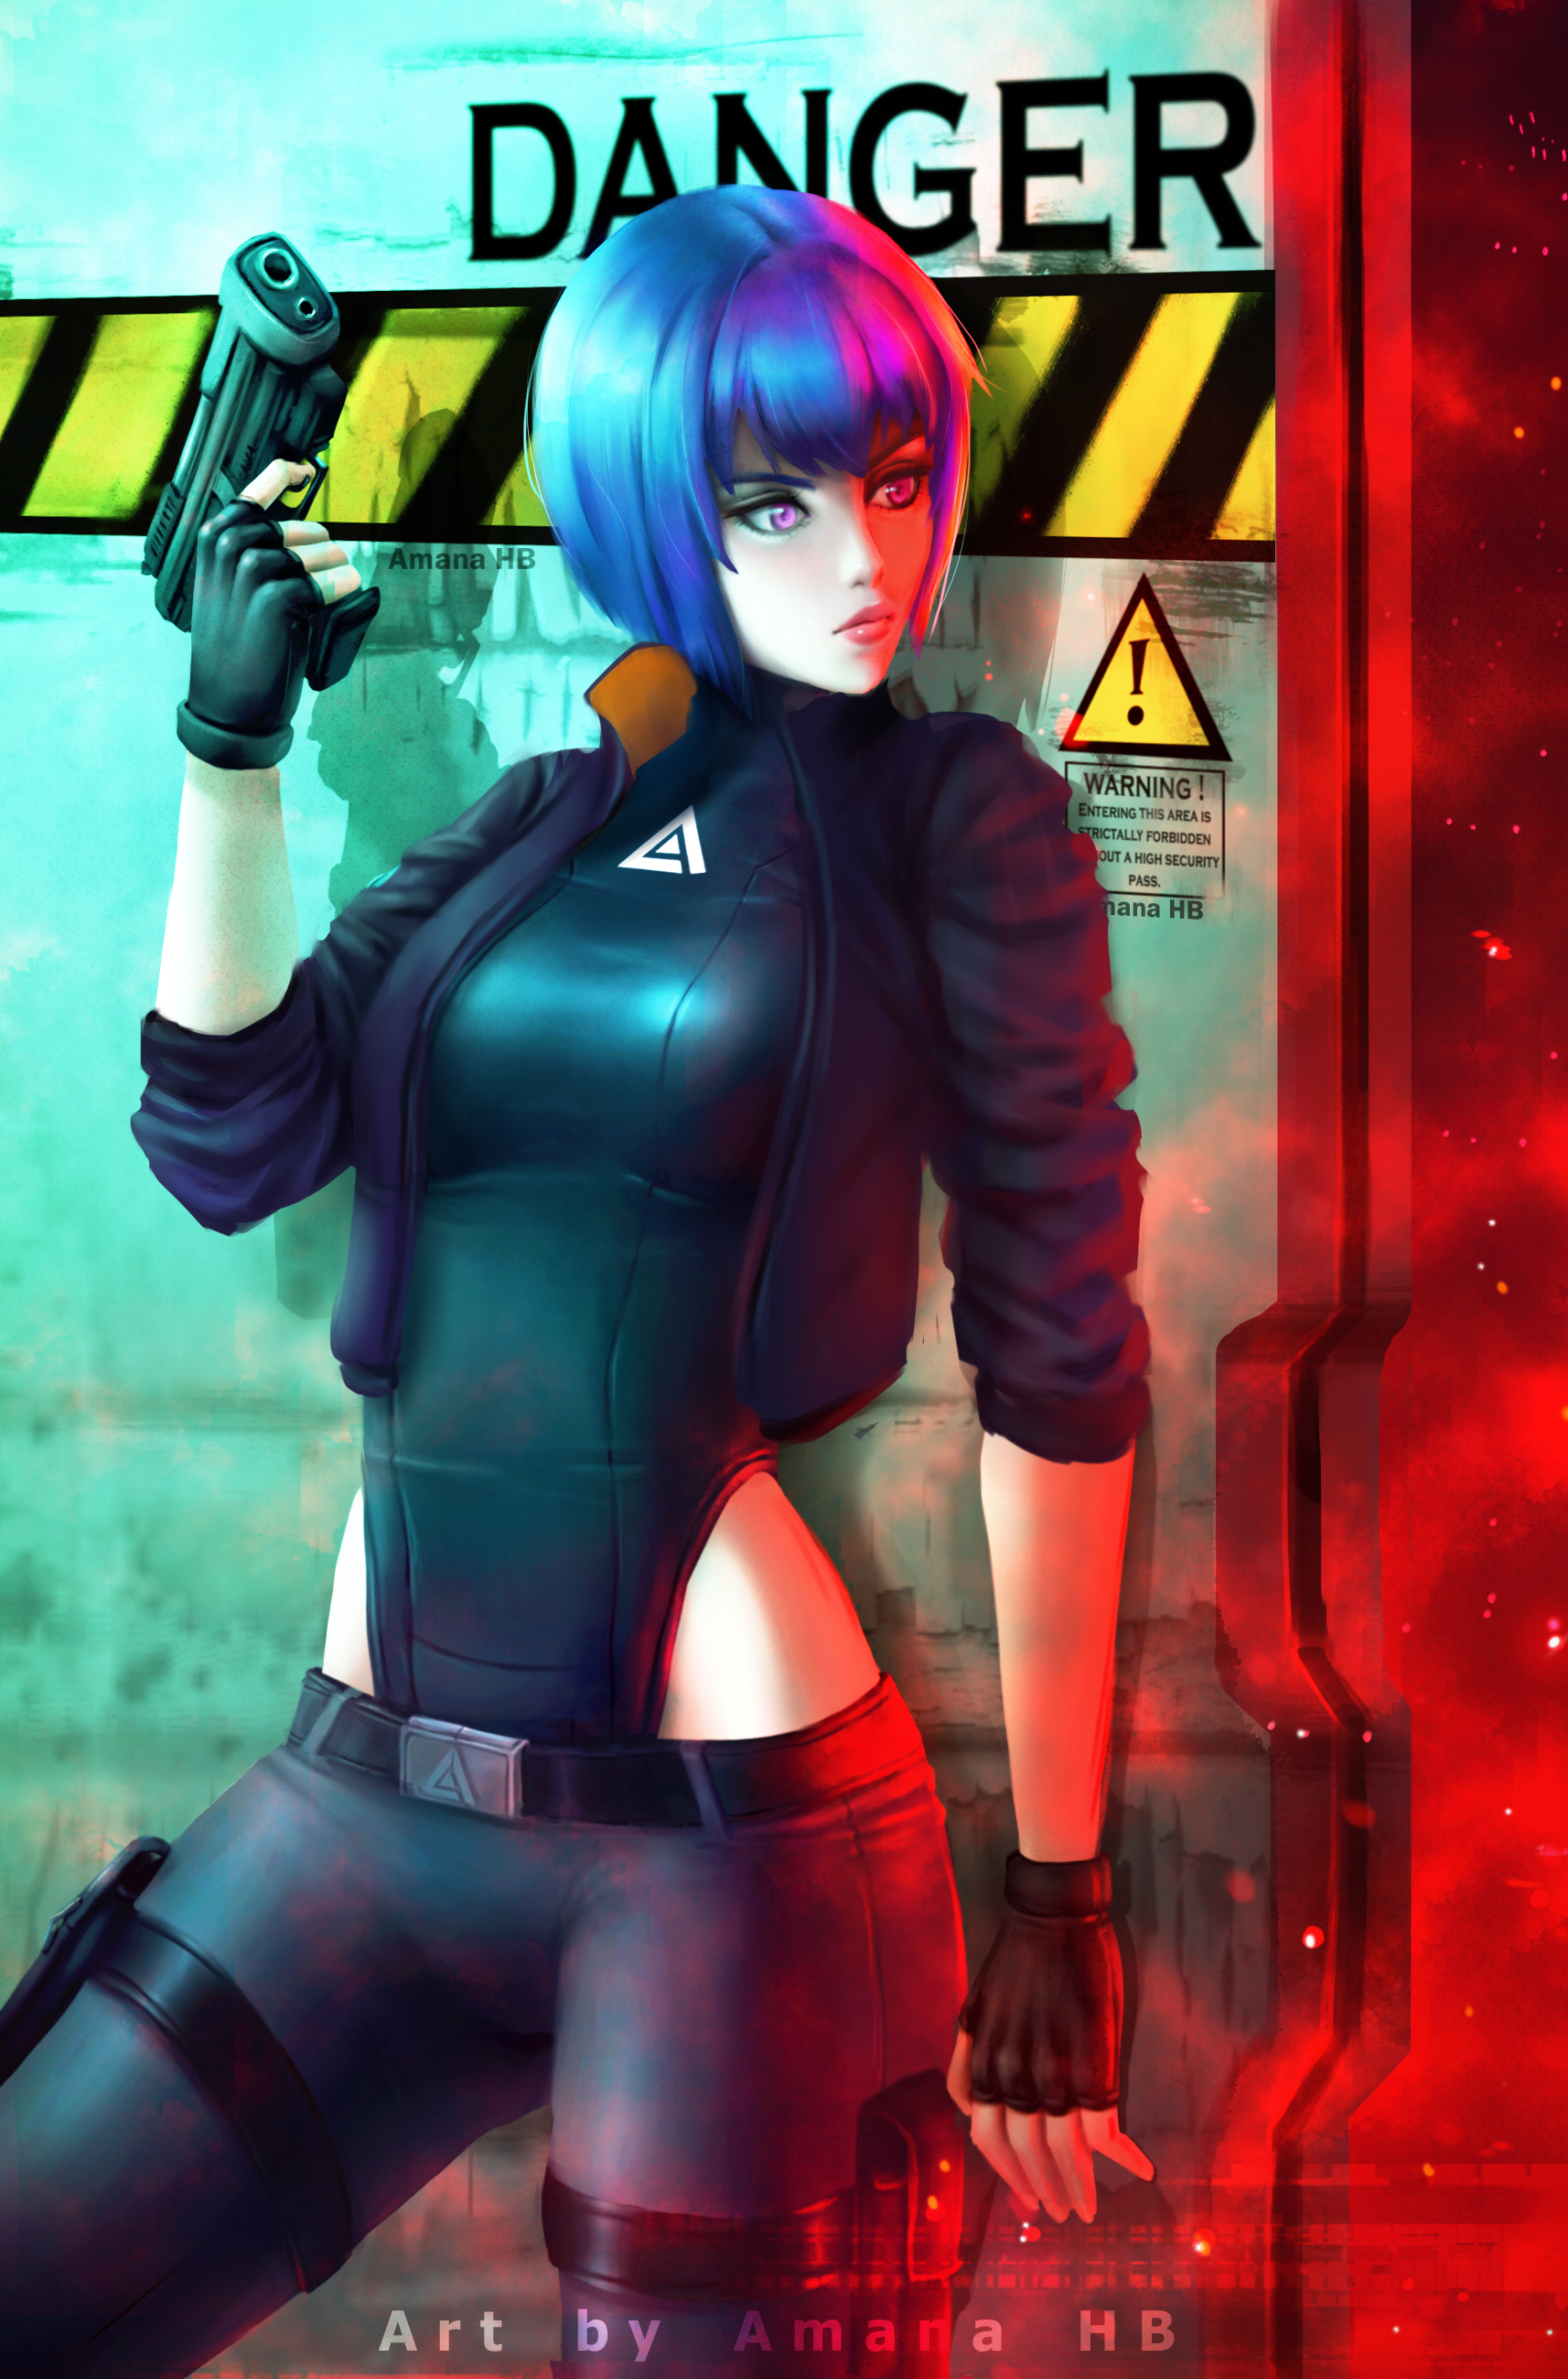 Ghost in the shell SAC_2045 (jacket version2) by Amana_HB